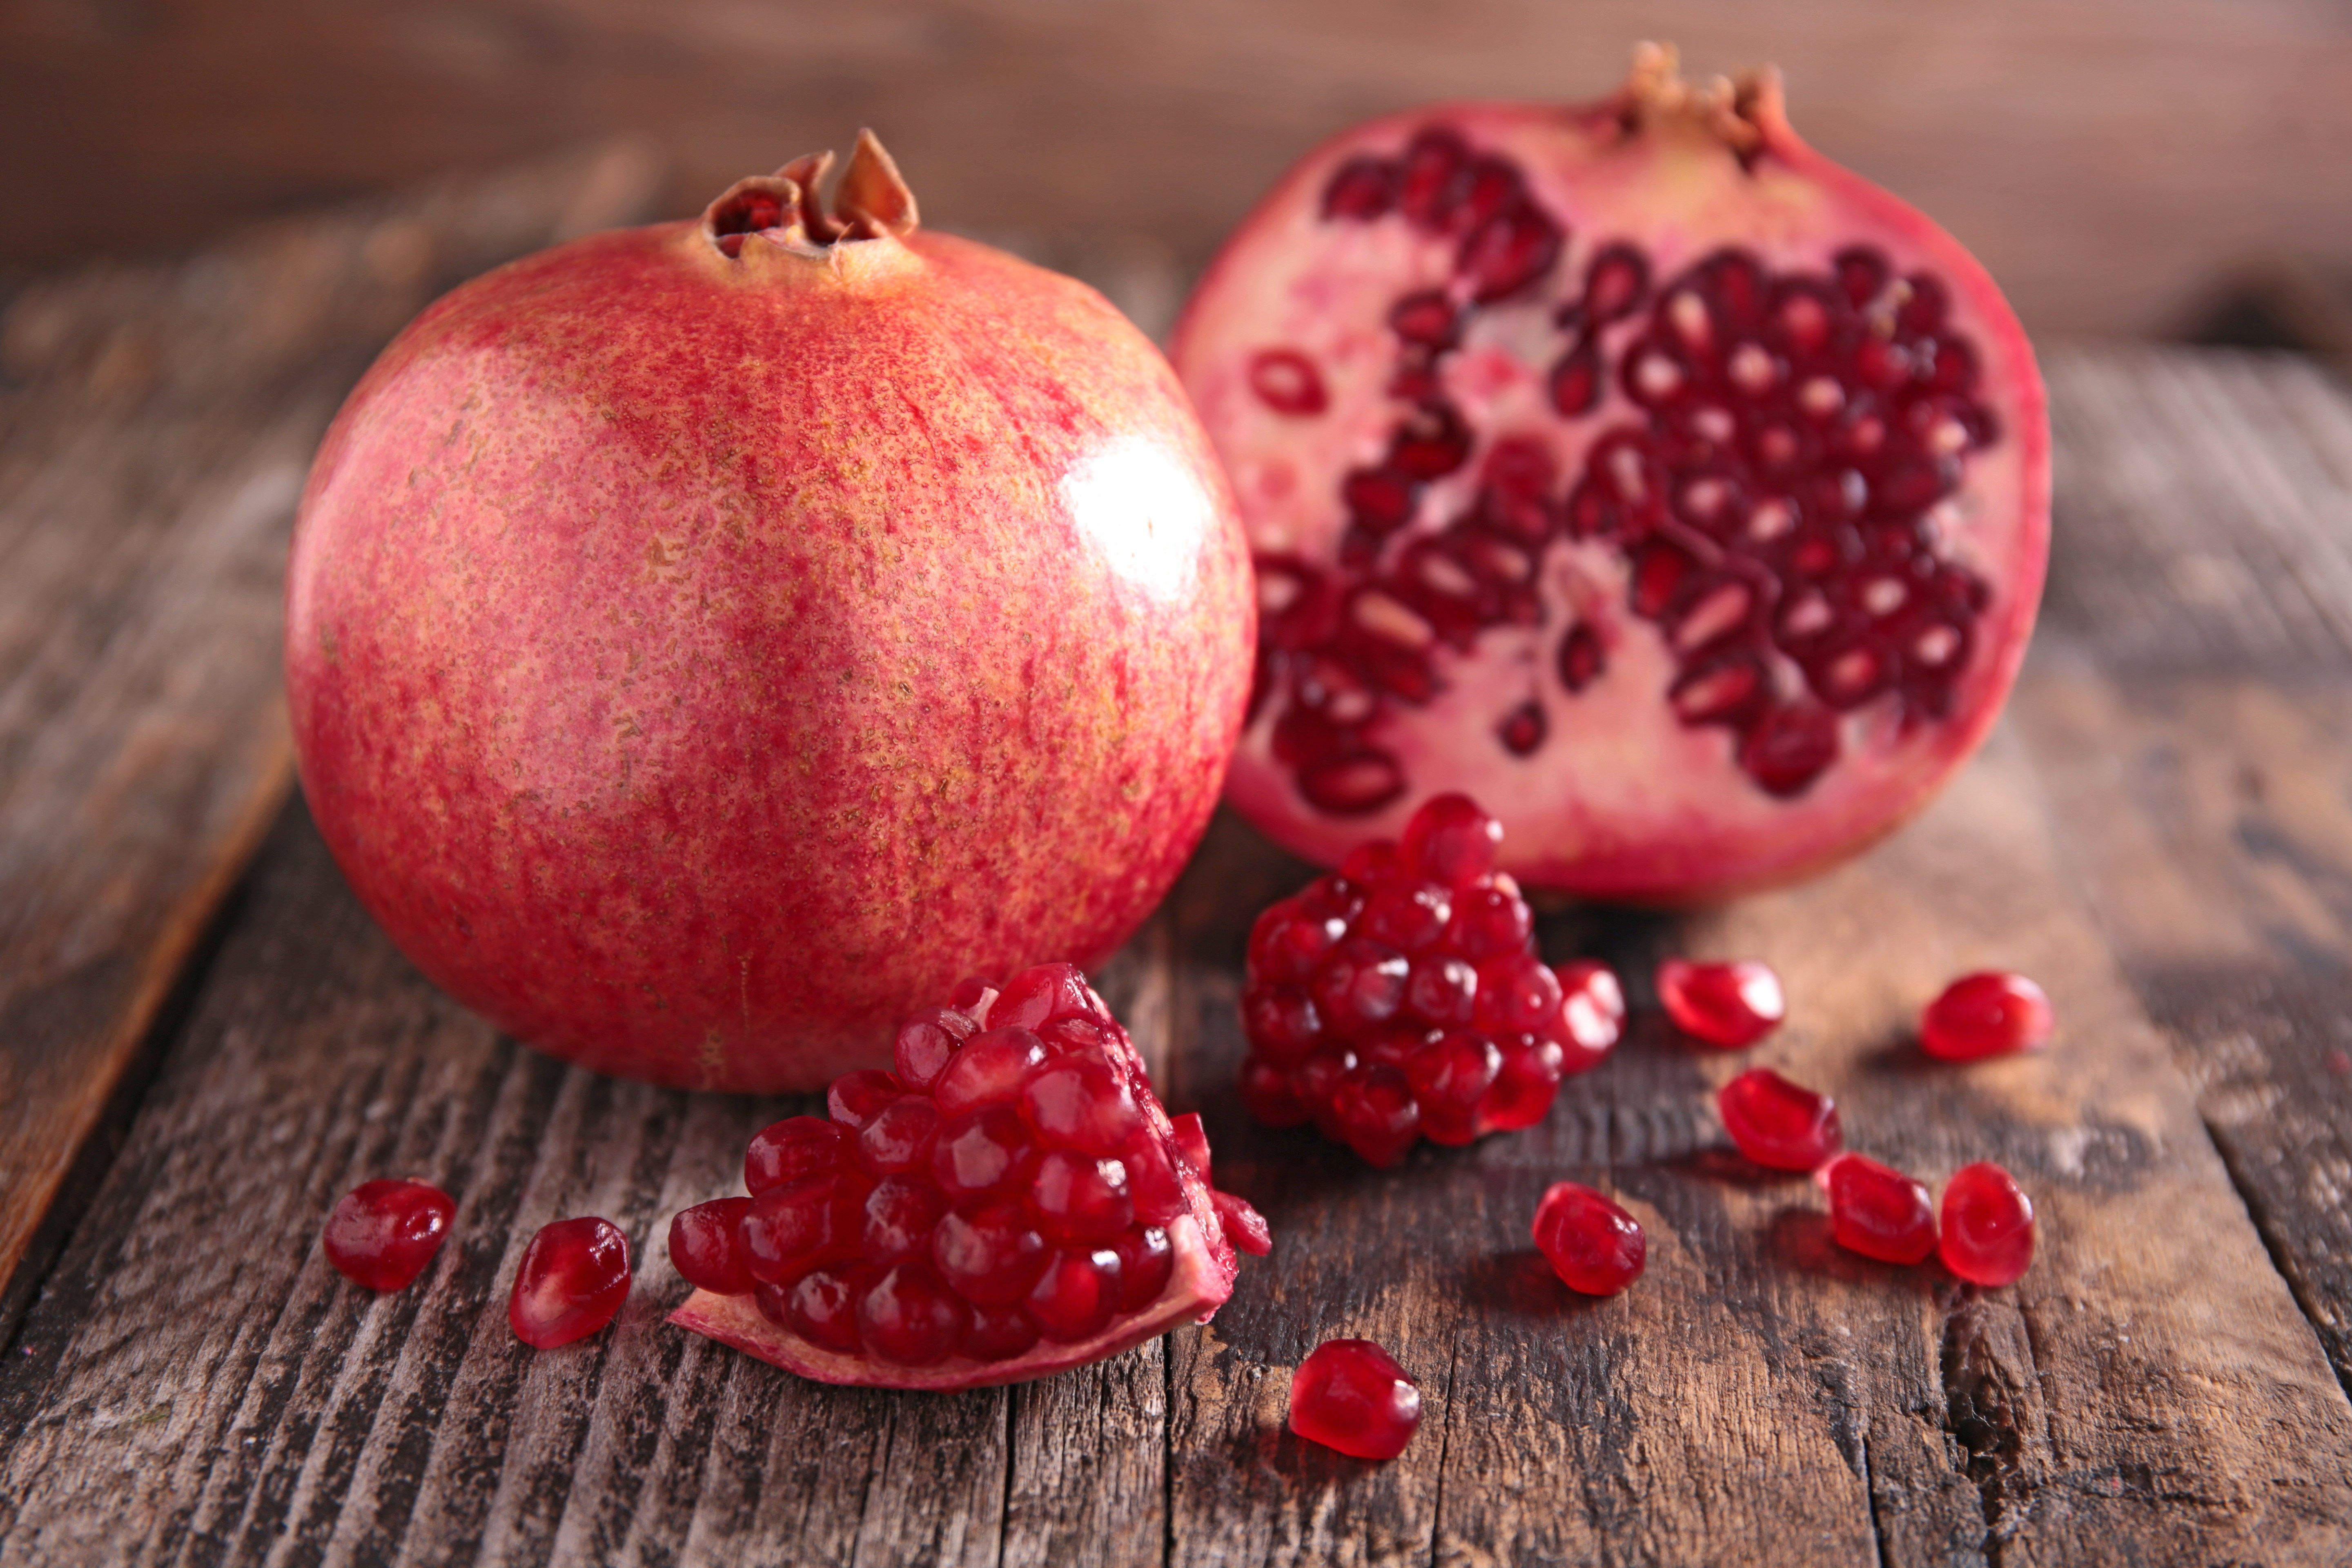 Pomegranate Wallpapers - Wallpaper Cave